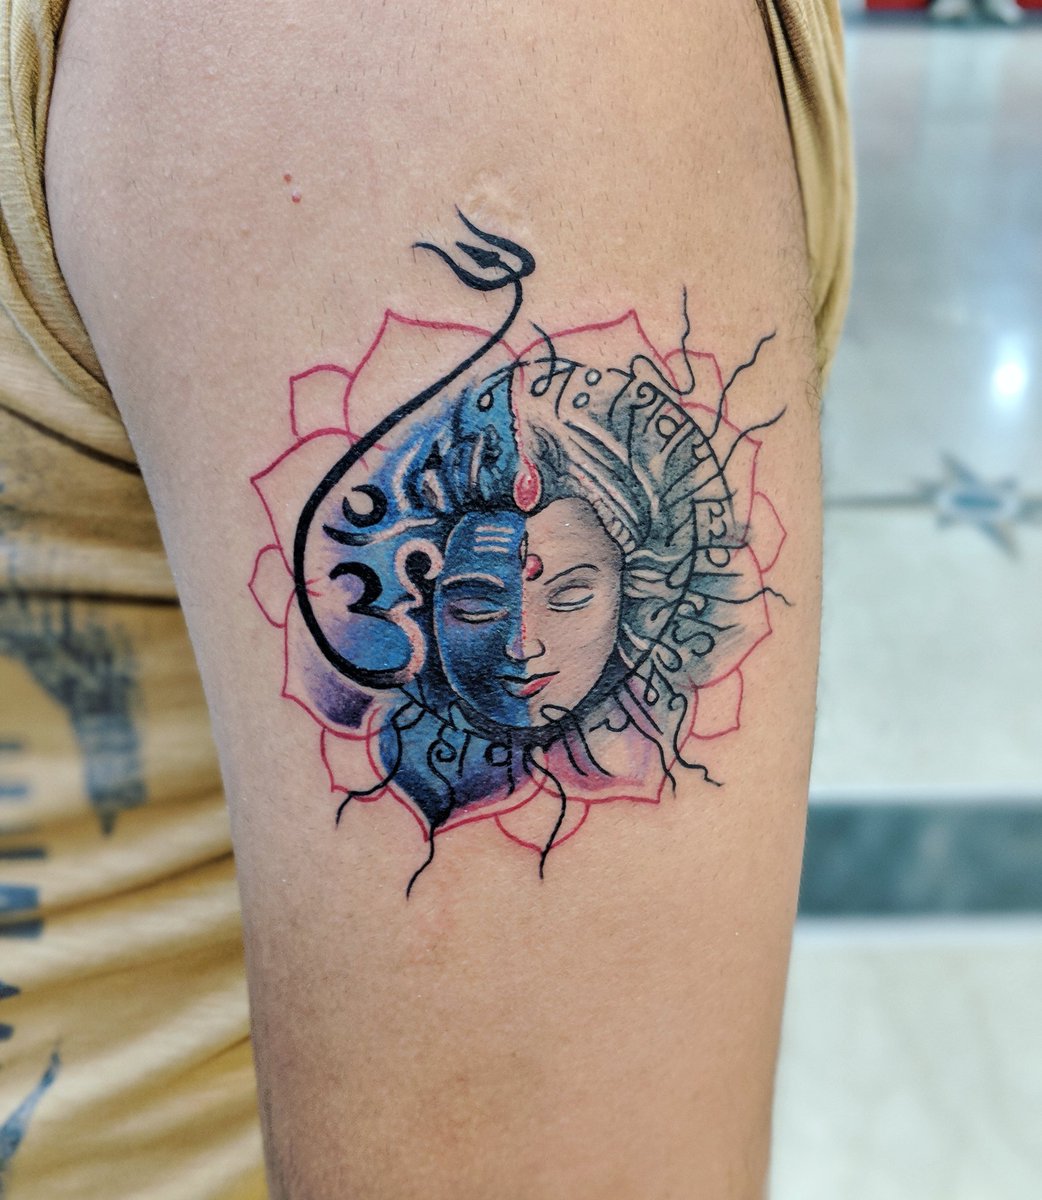 Crazy ink tattoo  Body piercing on X LORD SHIVA PARVATI TATTOO we are  For more info visithttpstcoFfjZOCNy5q httpstcoCdMSkuluKt  X